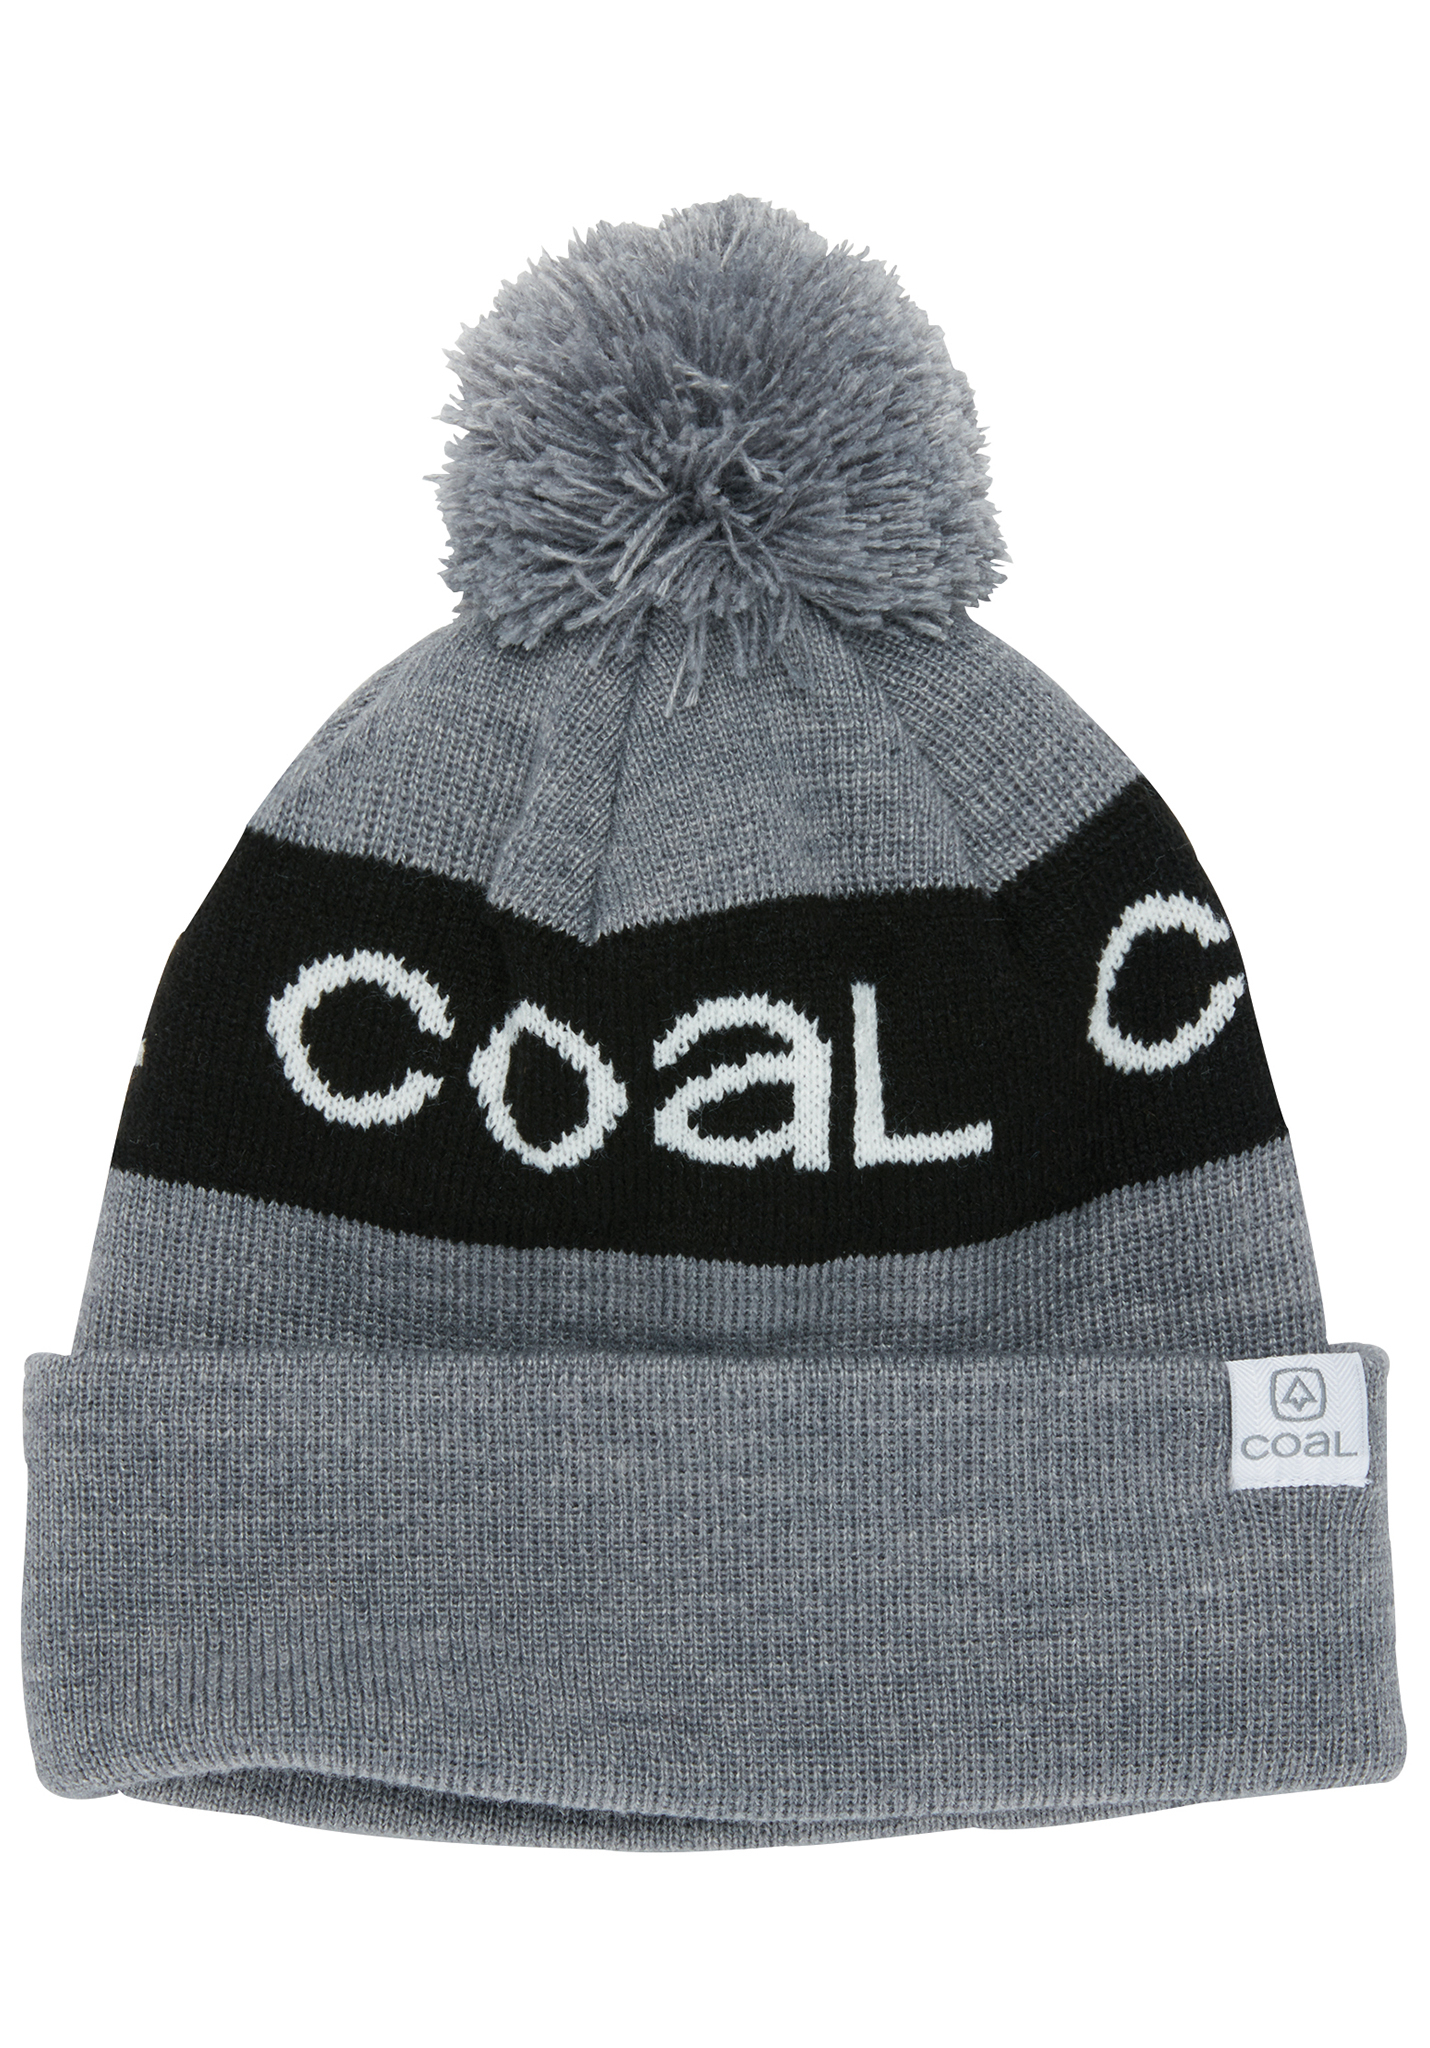 Coal The Team heather grey One Size